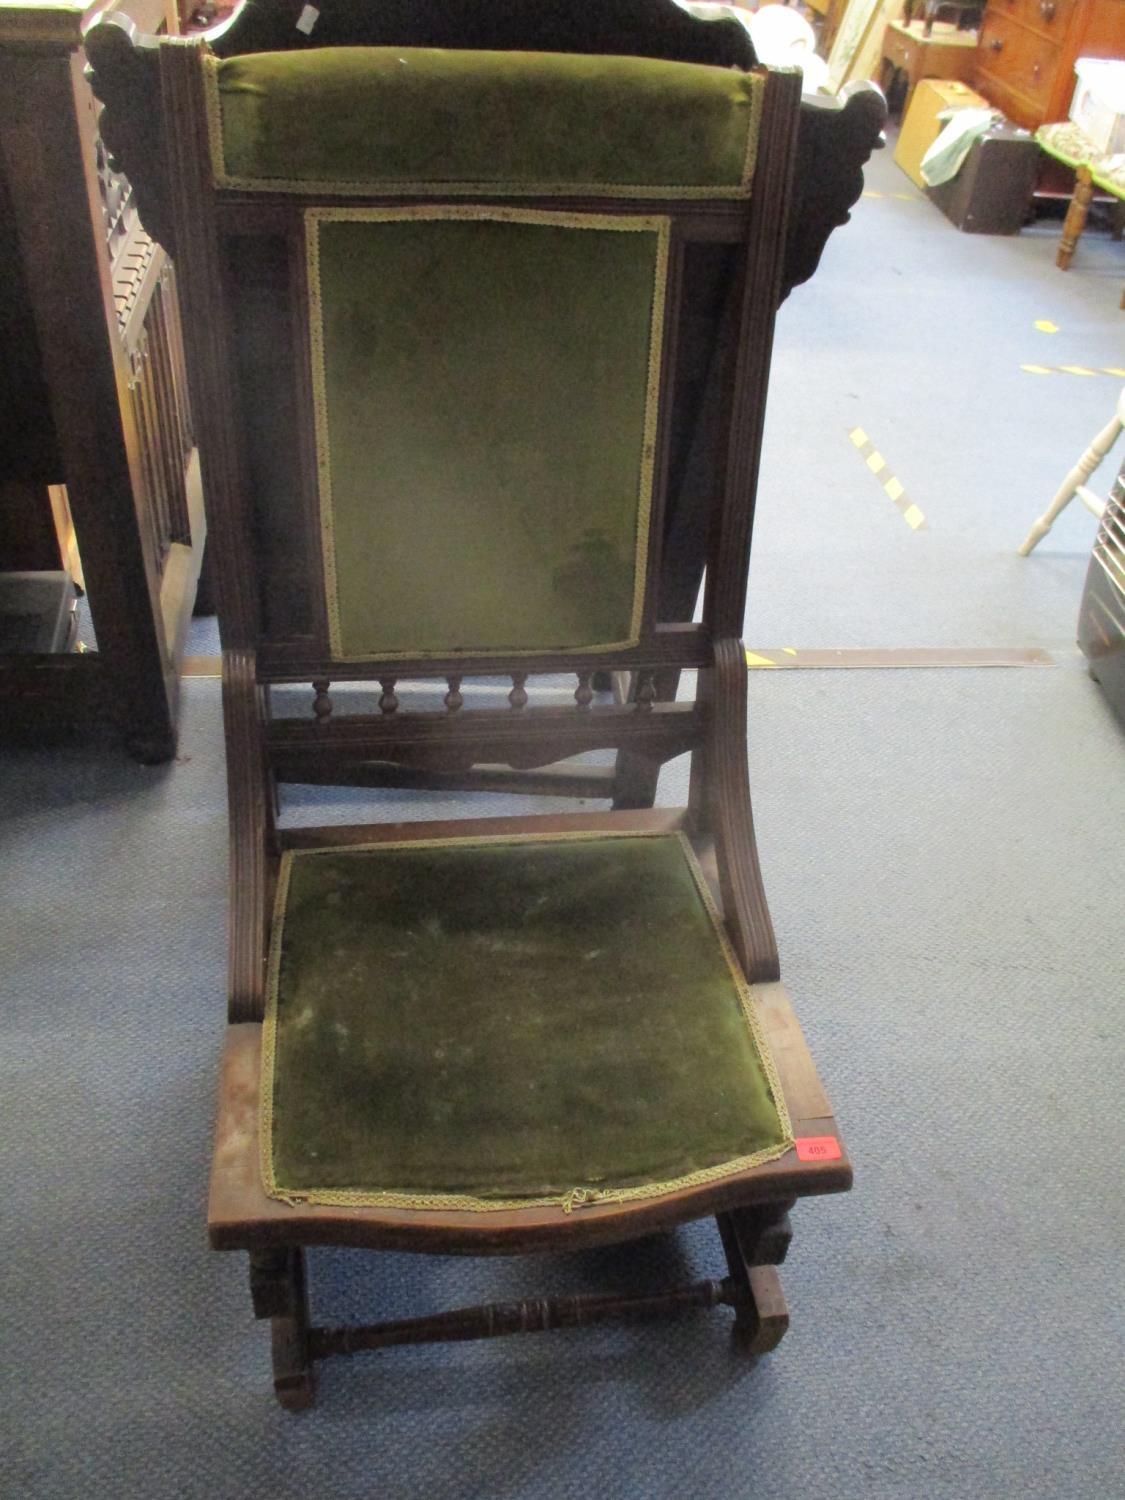 An early 20th century walnut American rocker chair upholstered seat and back in a green fabric,